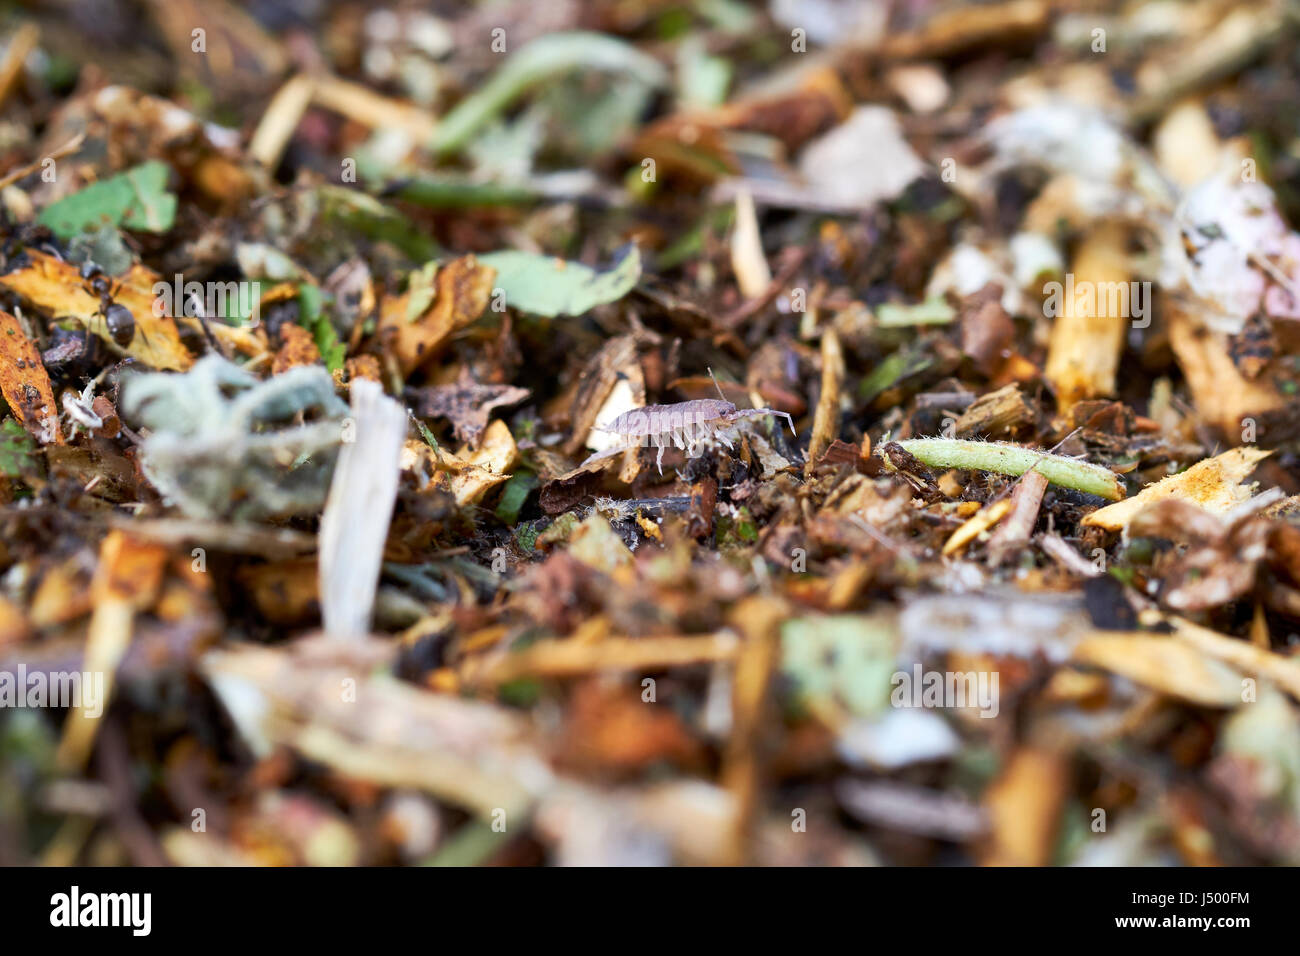 A Woodlouse (Trichoniscus pusillus) foraging in freshly shredded garden green waste mulch, UK. Stock Photo